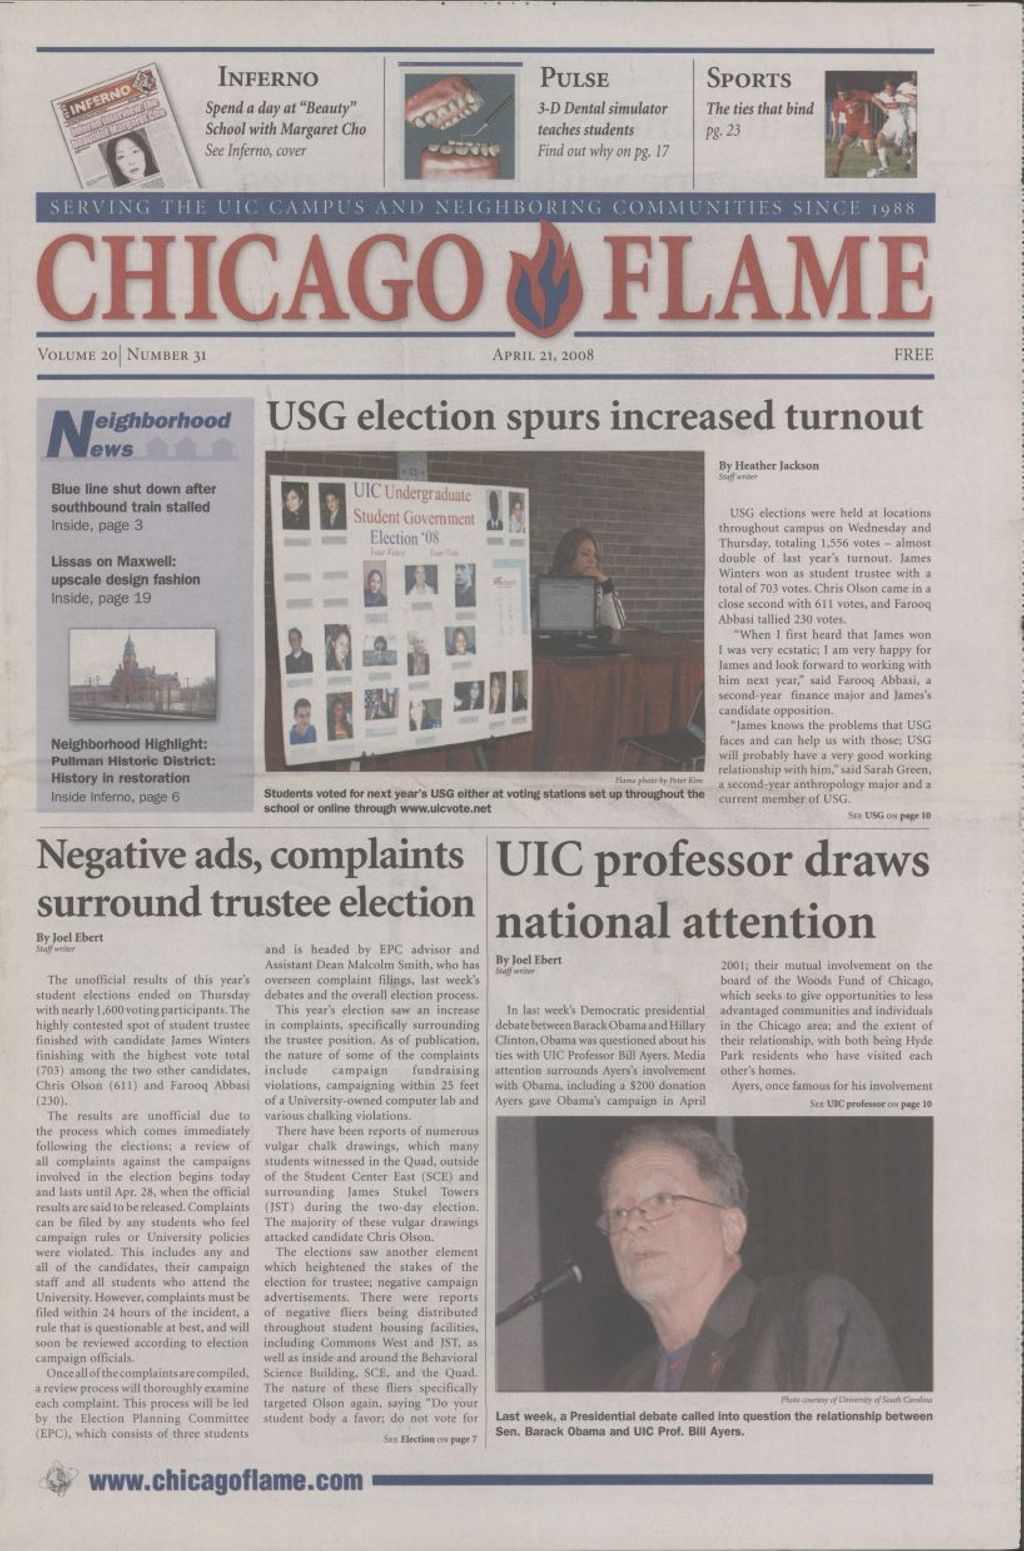 Miniature of Chicago Flame (April 21, 2008)